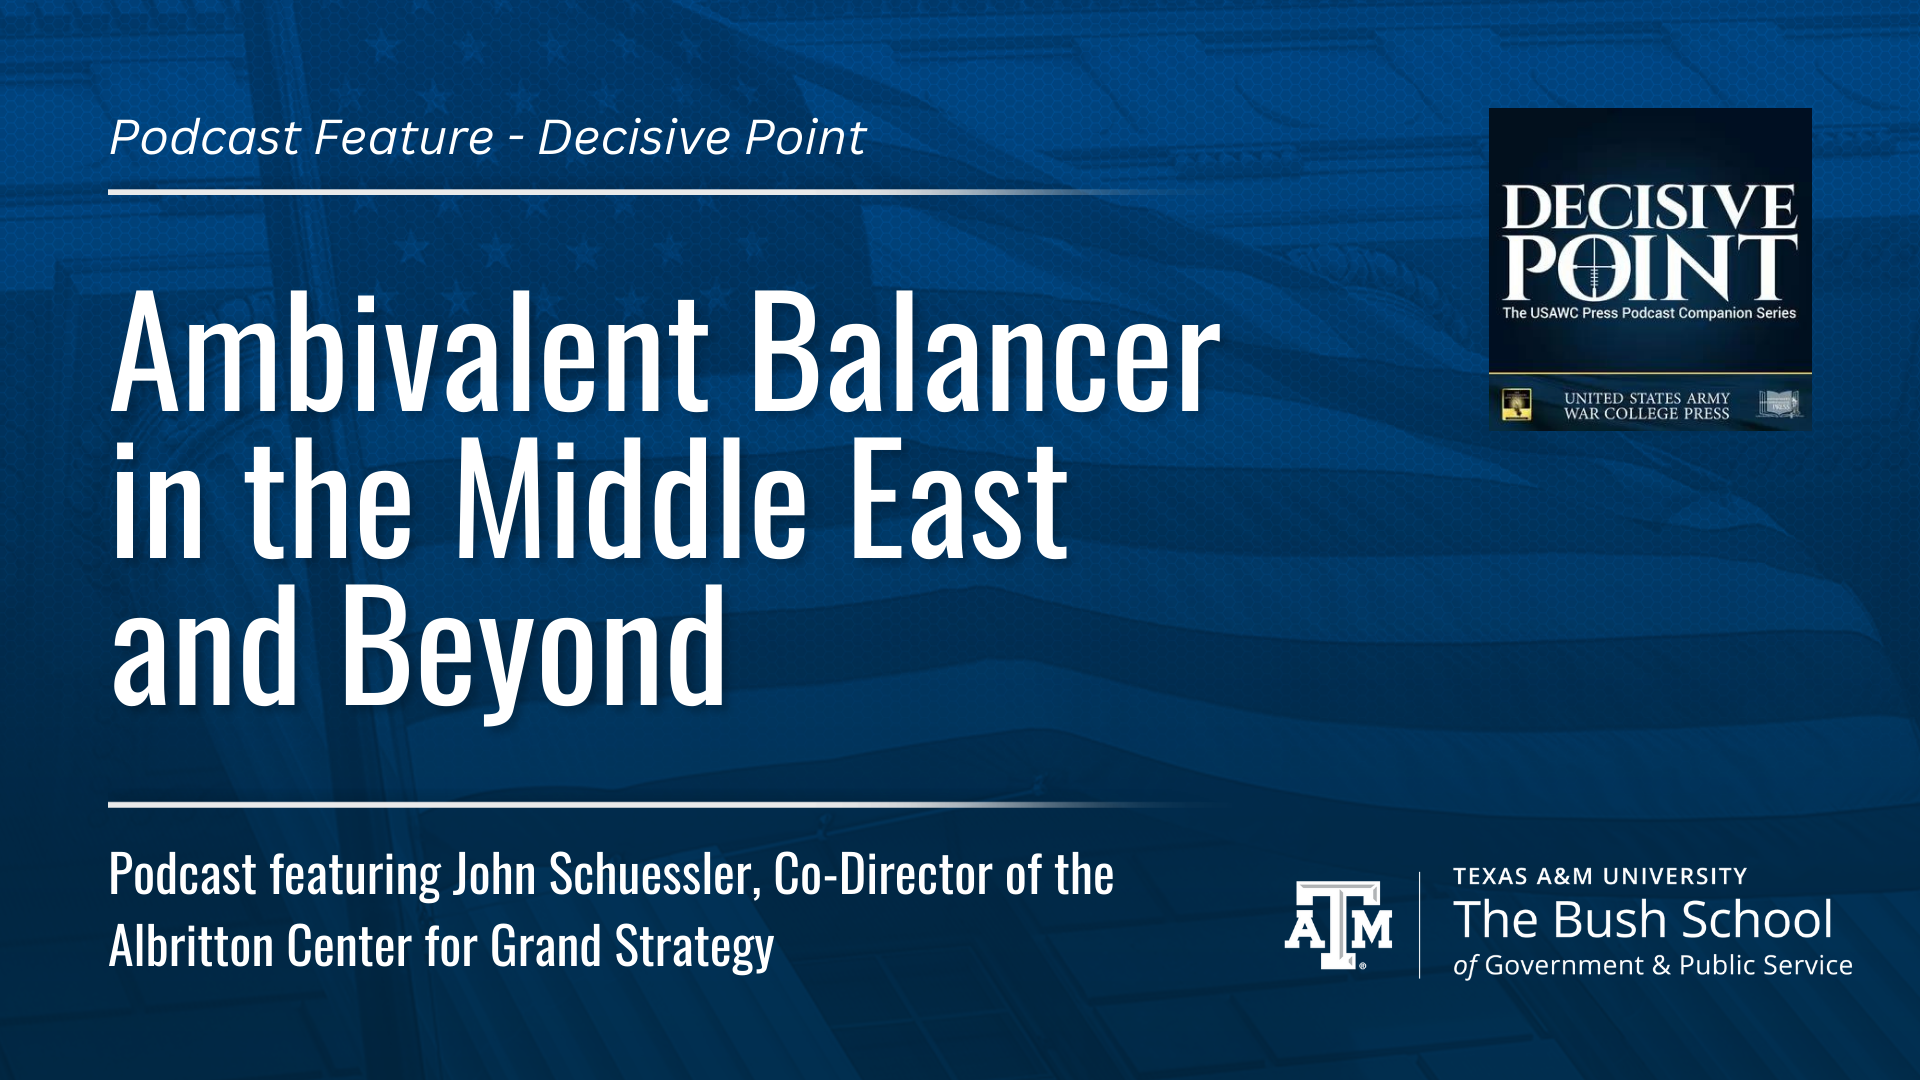 Bush School Associate Professor discusses &#8220;Ambivalent Balancer in the Middle East and Beyond&#8221; in Decisive Point Podcast